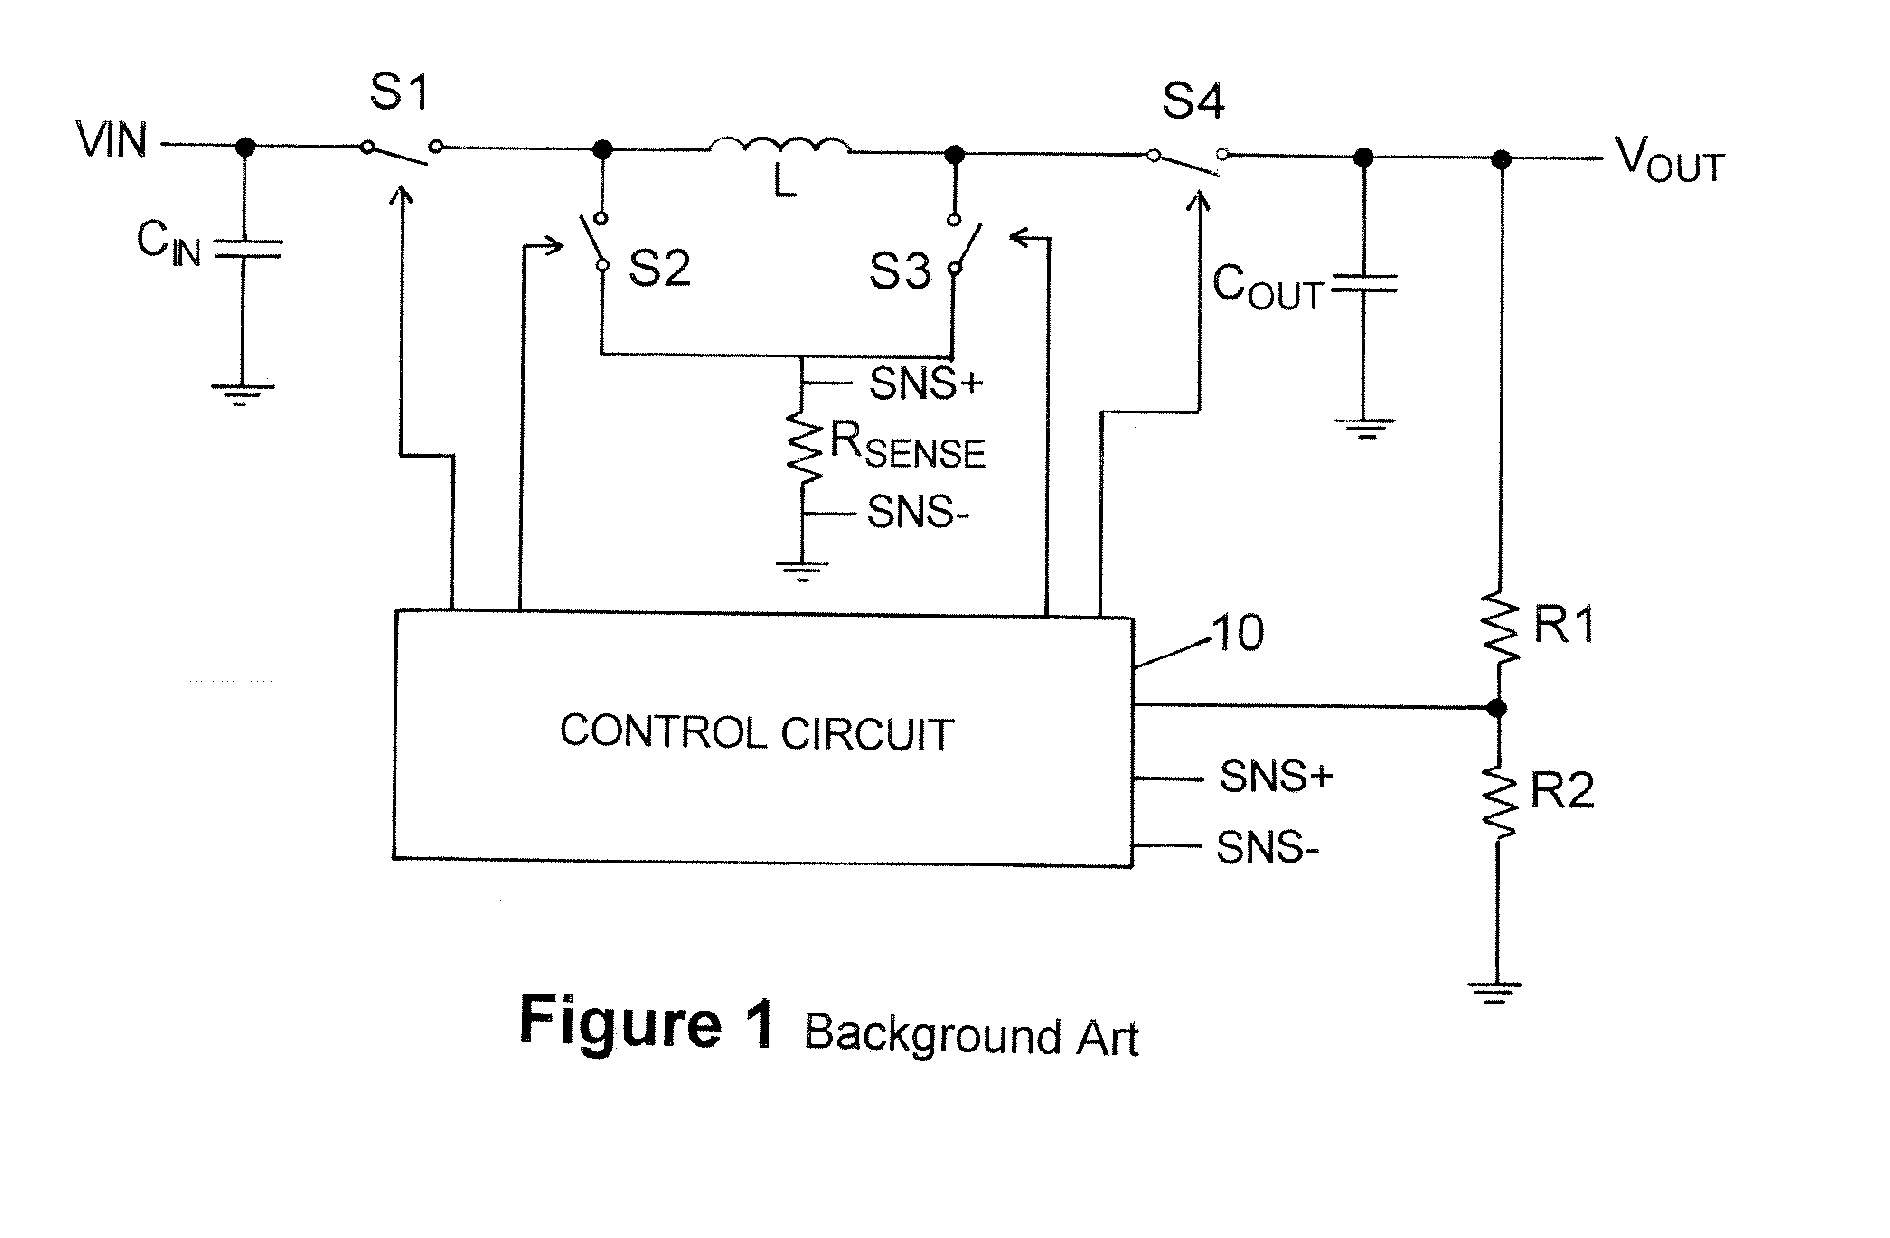 Switching scheme for step up-step down converters using fixed frequency current-mode control